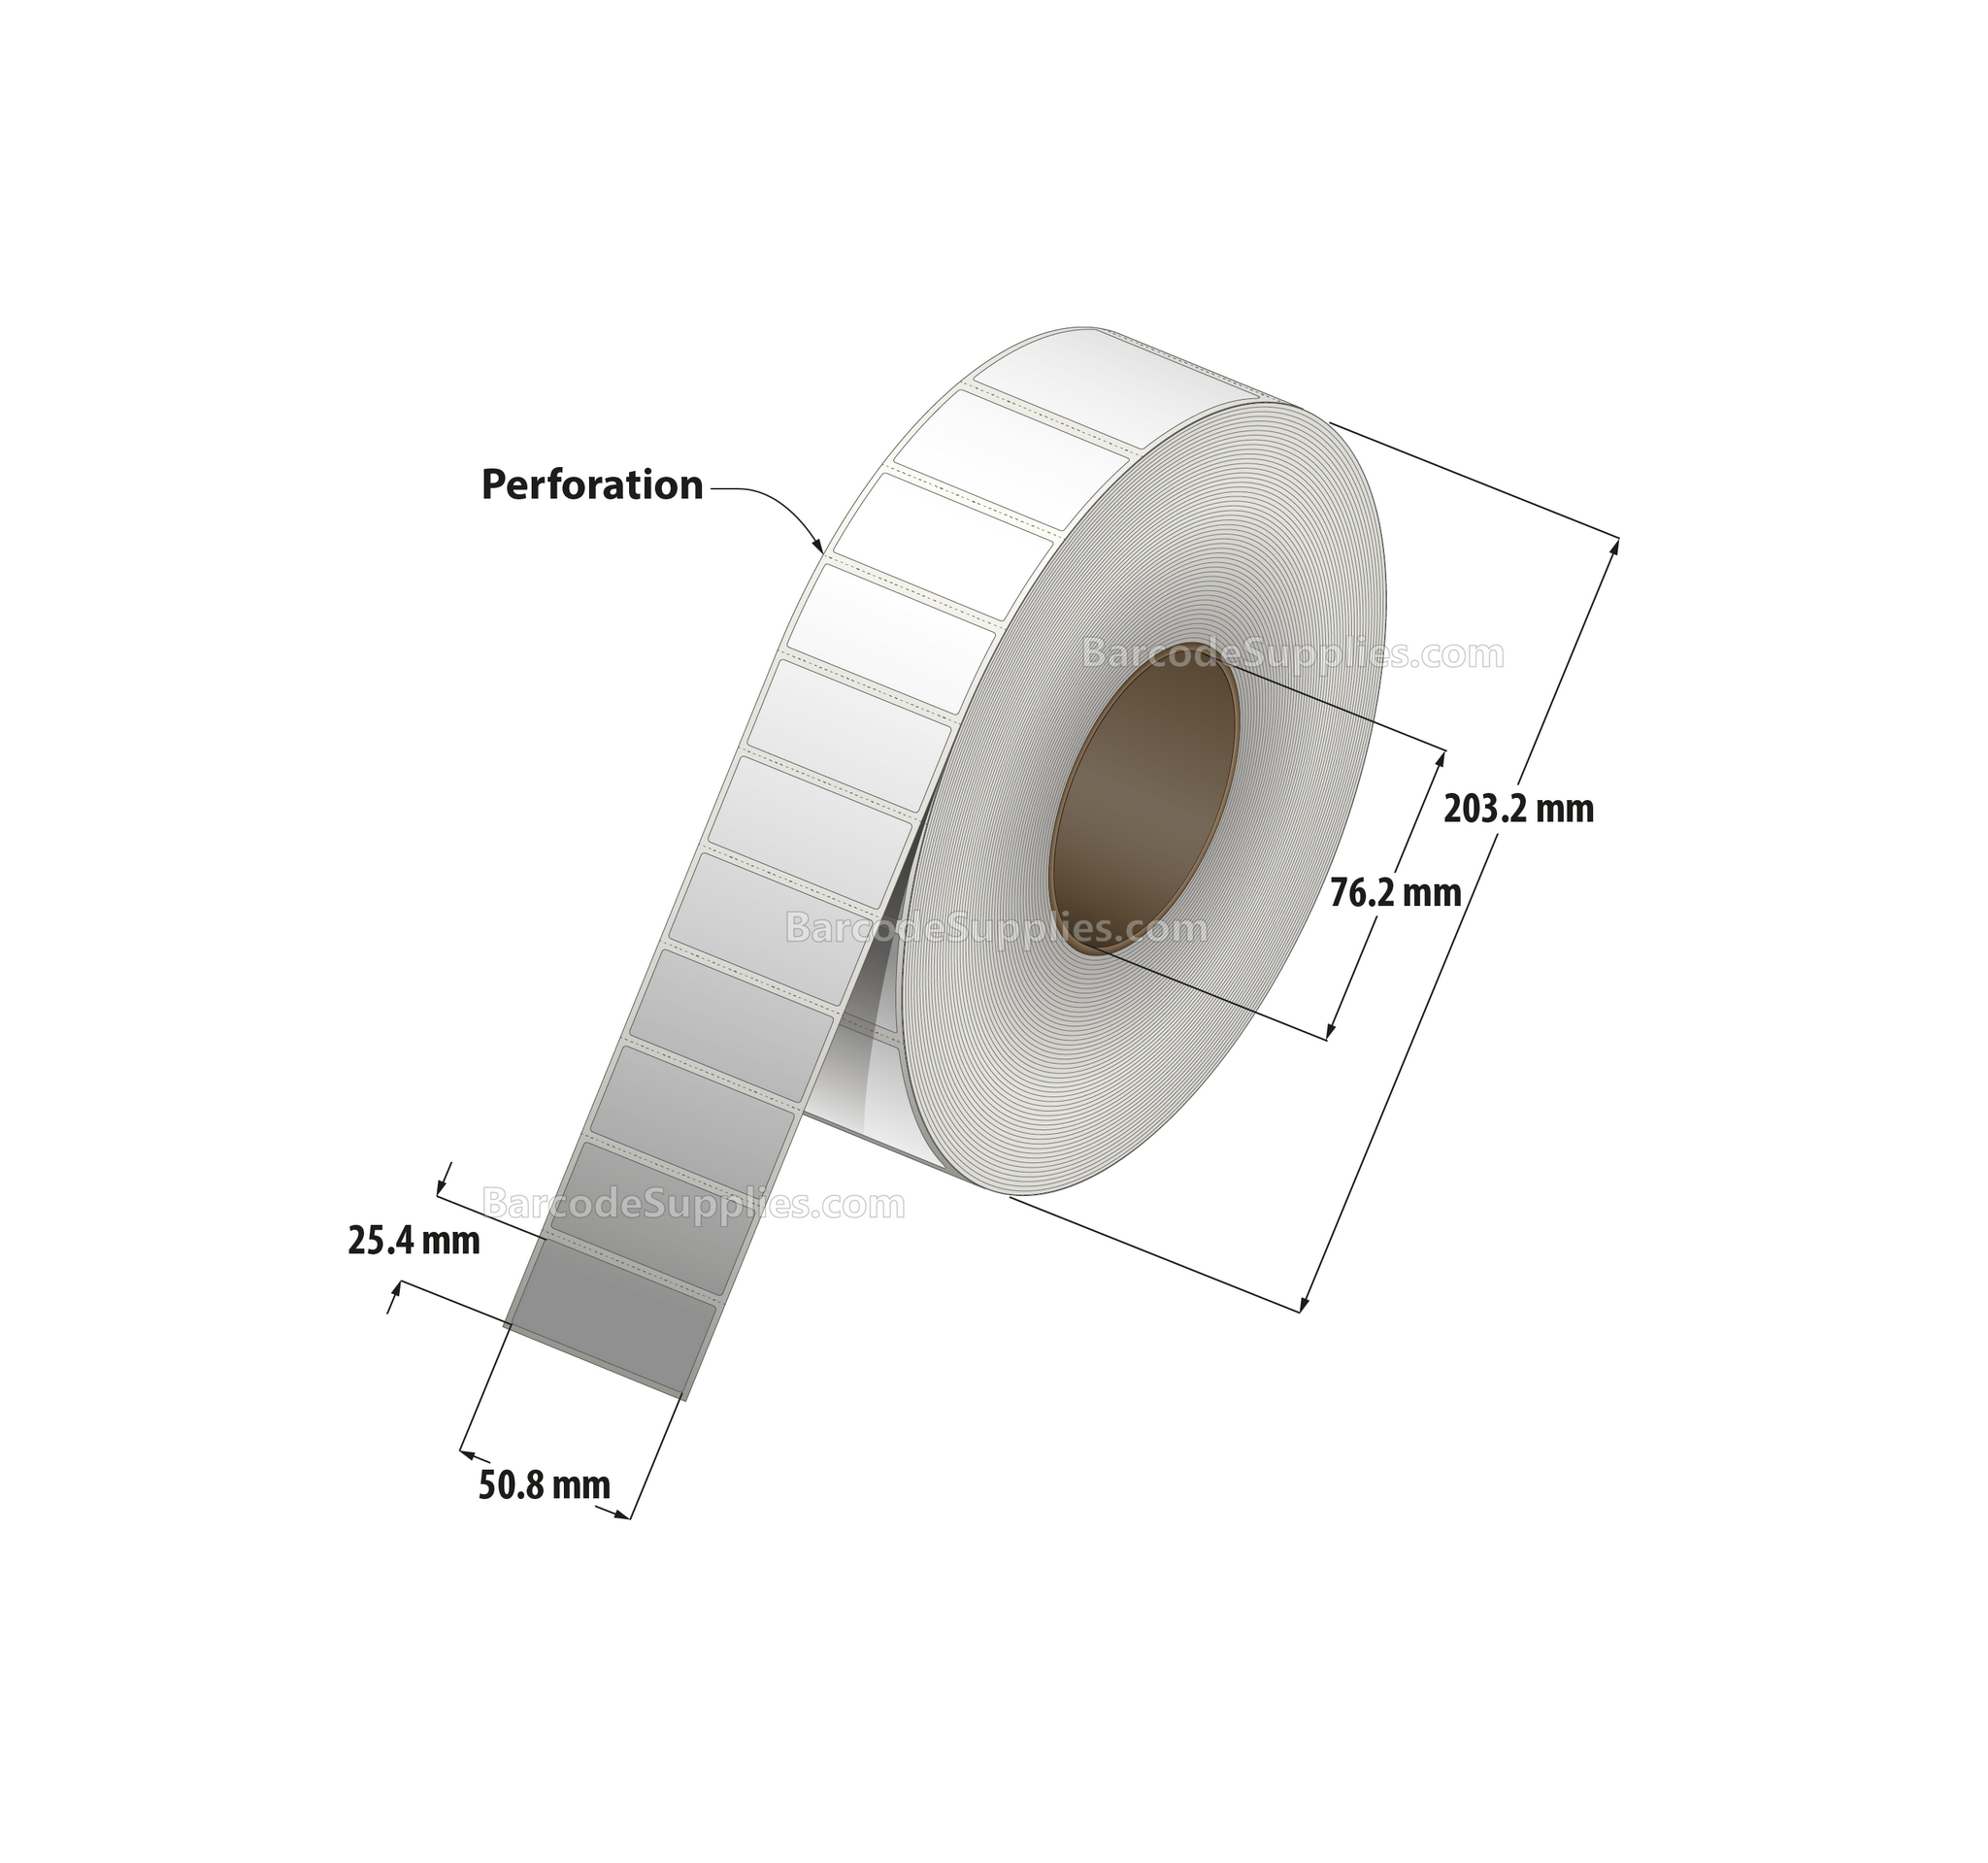 2 x 1 Thermal Transfer White Labels With Permanent Adhesive - Perforated - 11,000 Labels Per Roll - Carton Of 4 Rolls - 44000 Labels Total - MPN: RT-2-1-11000-3